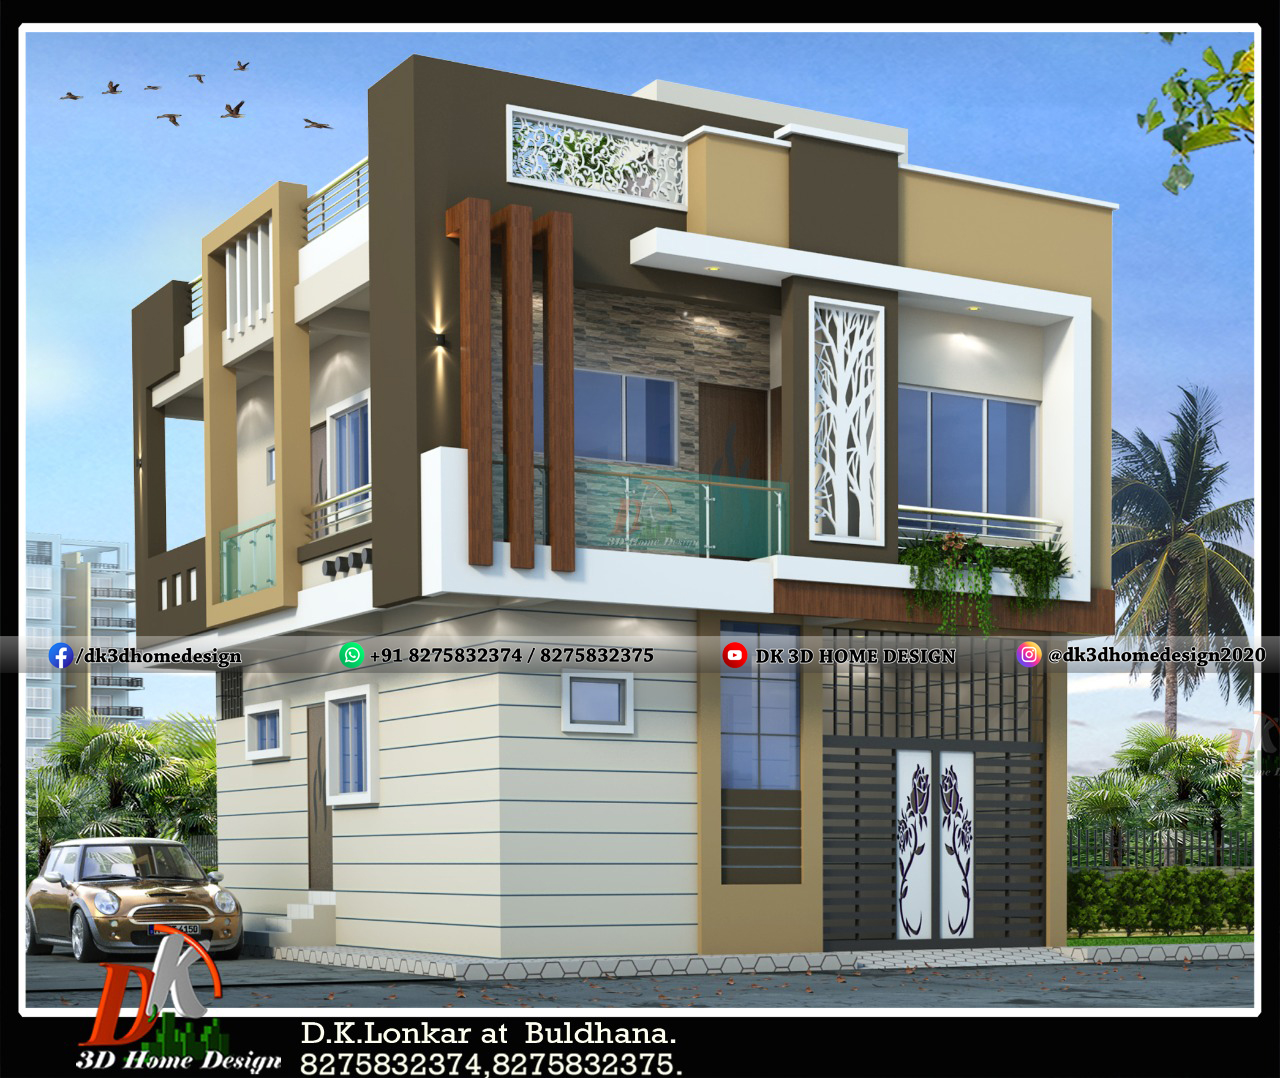 Low cost modern house design 